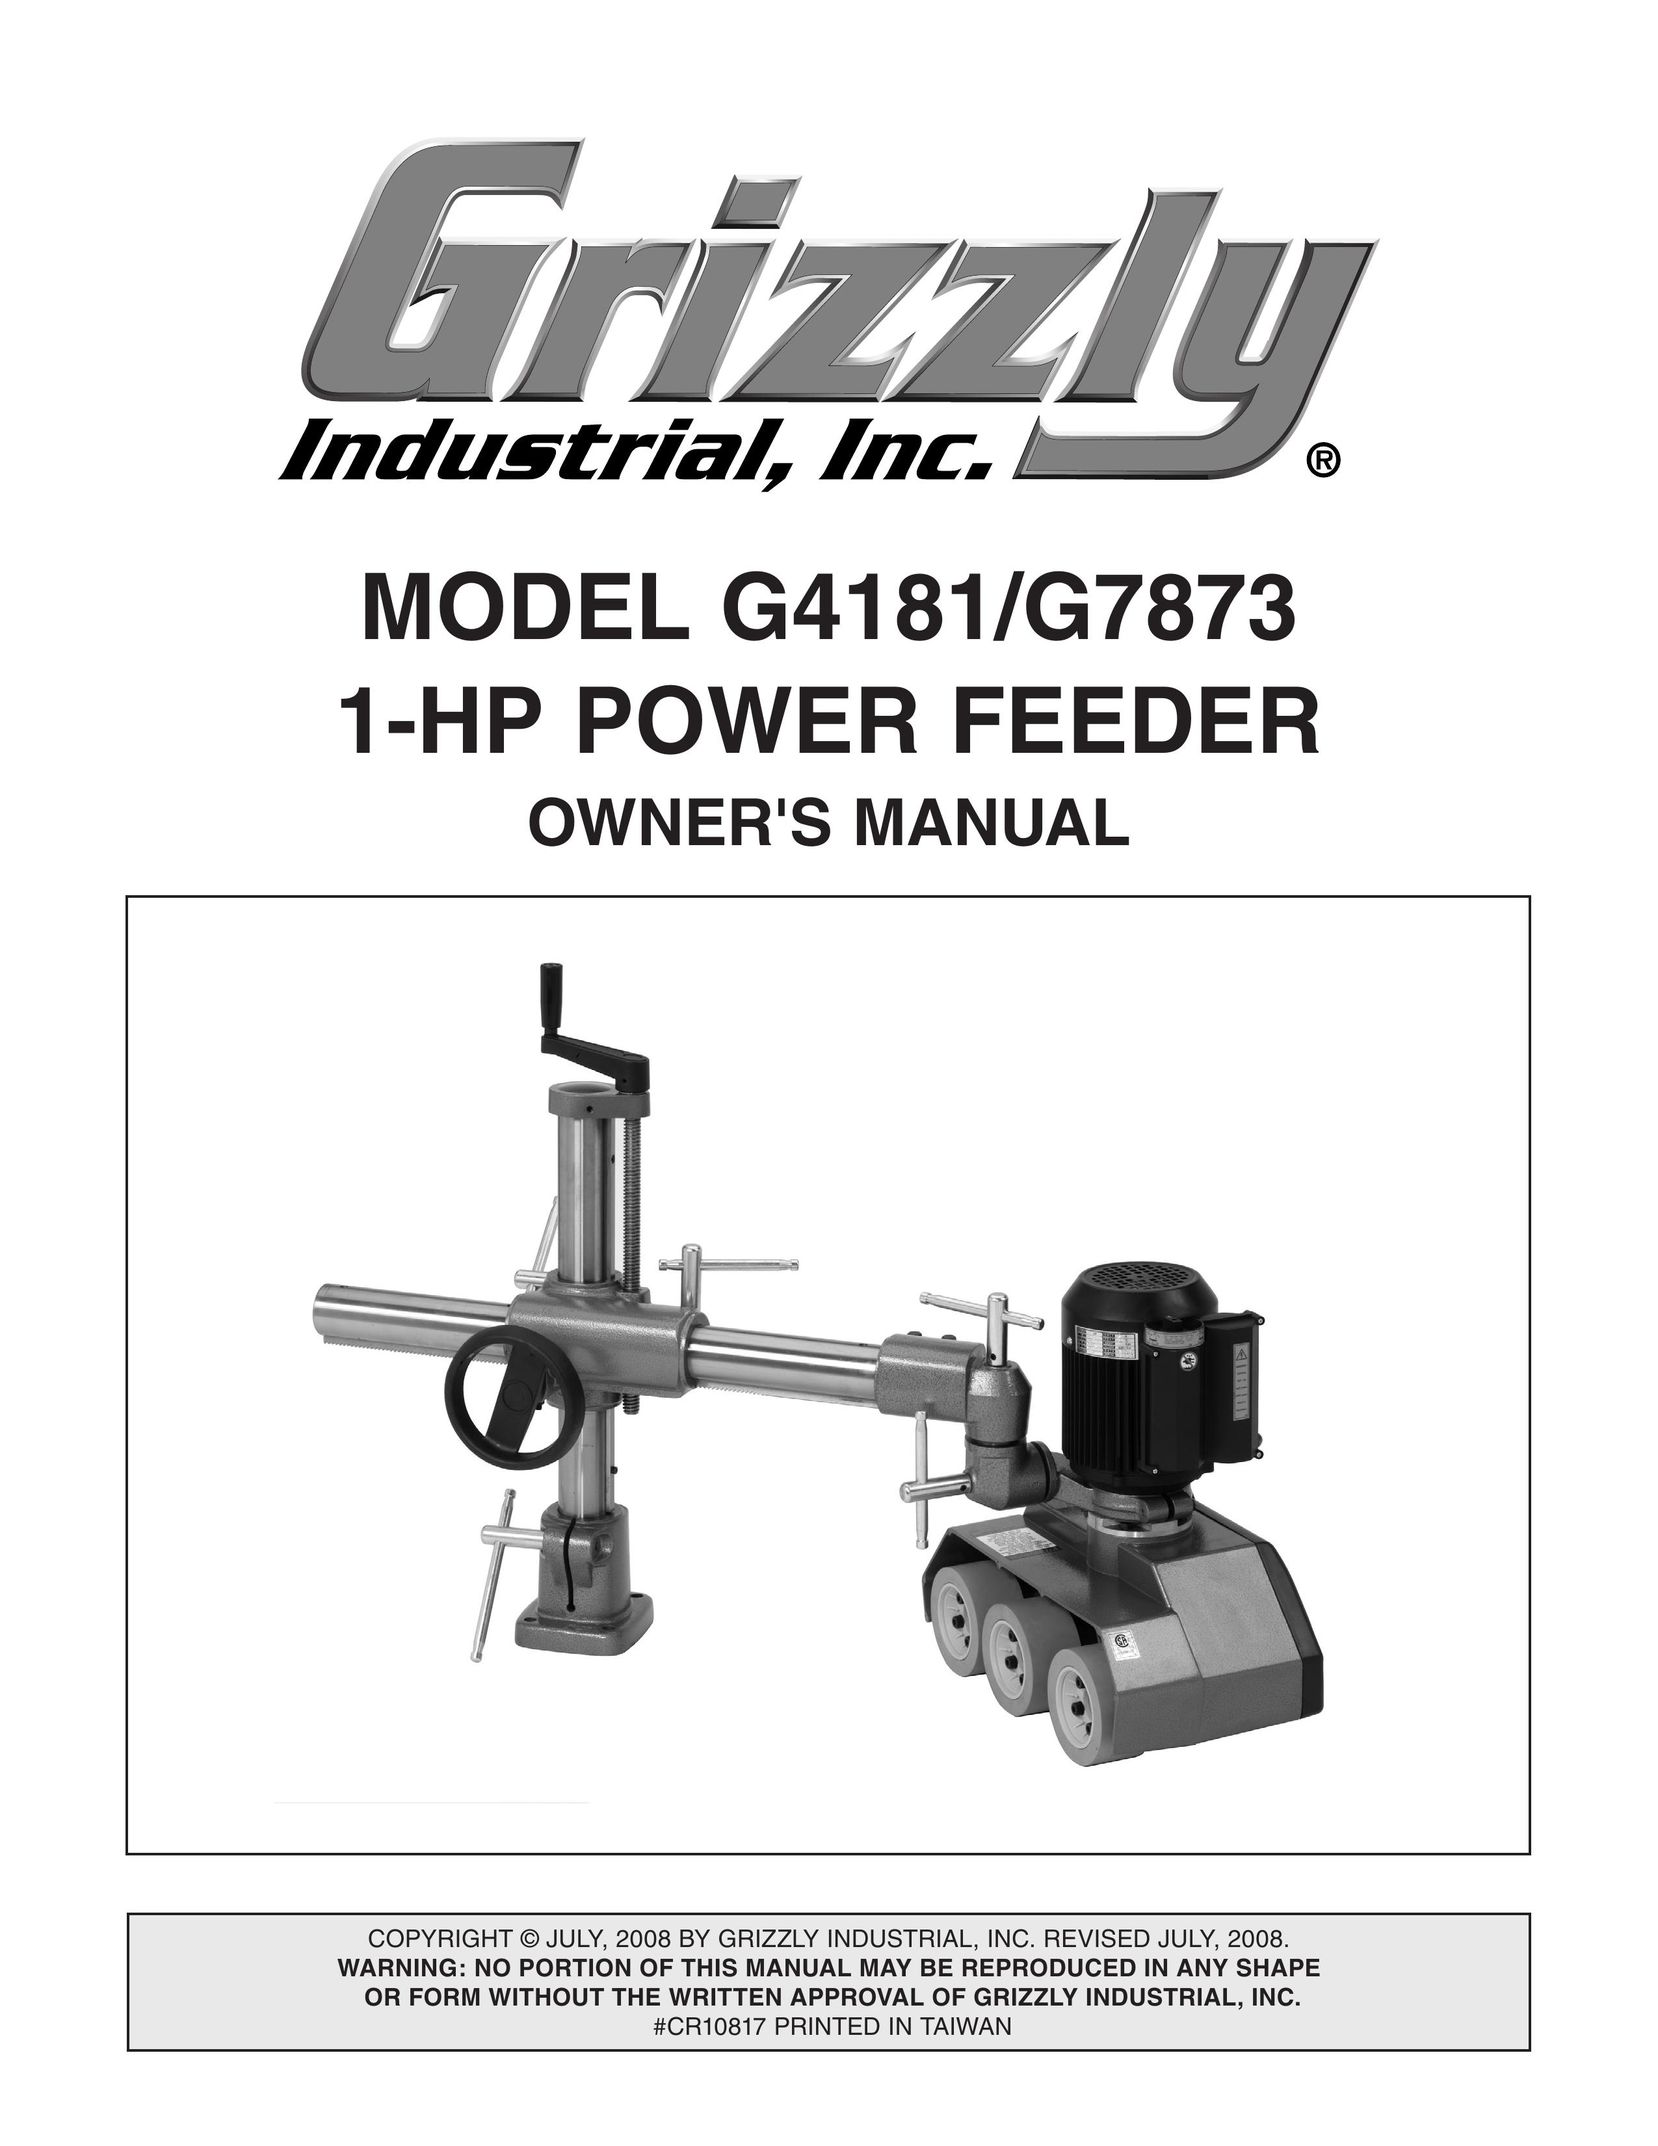 Grizzly G4181 Welder User Manual